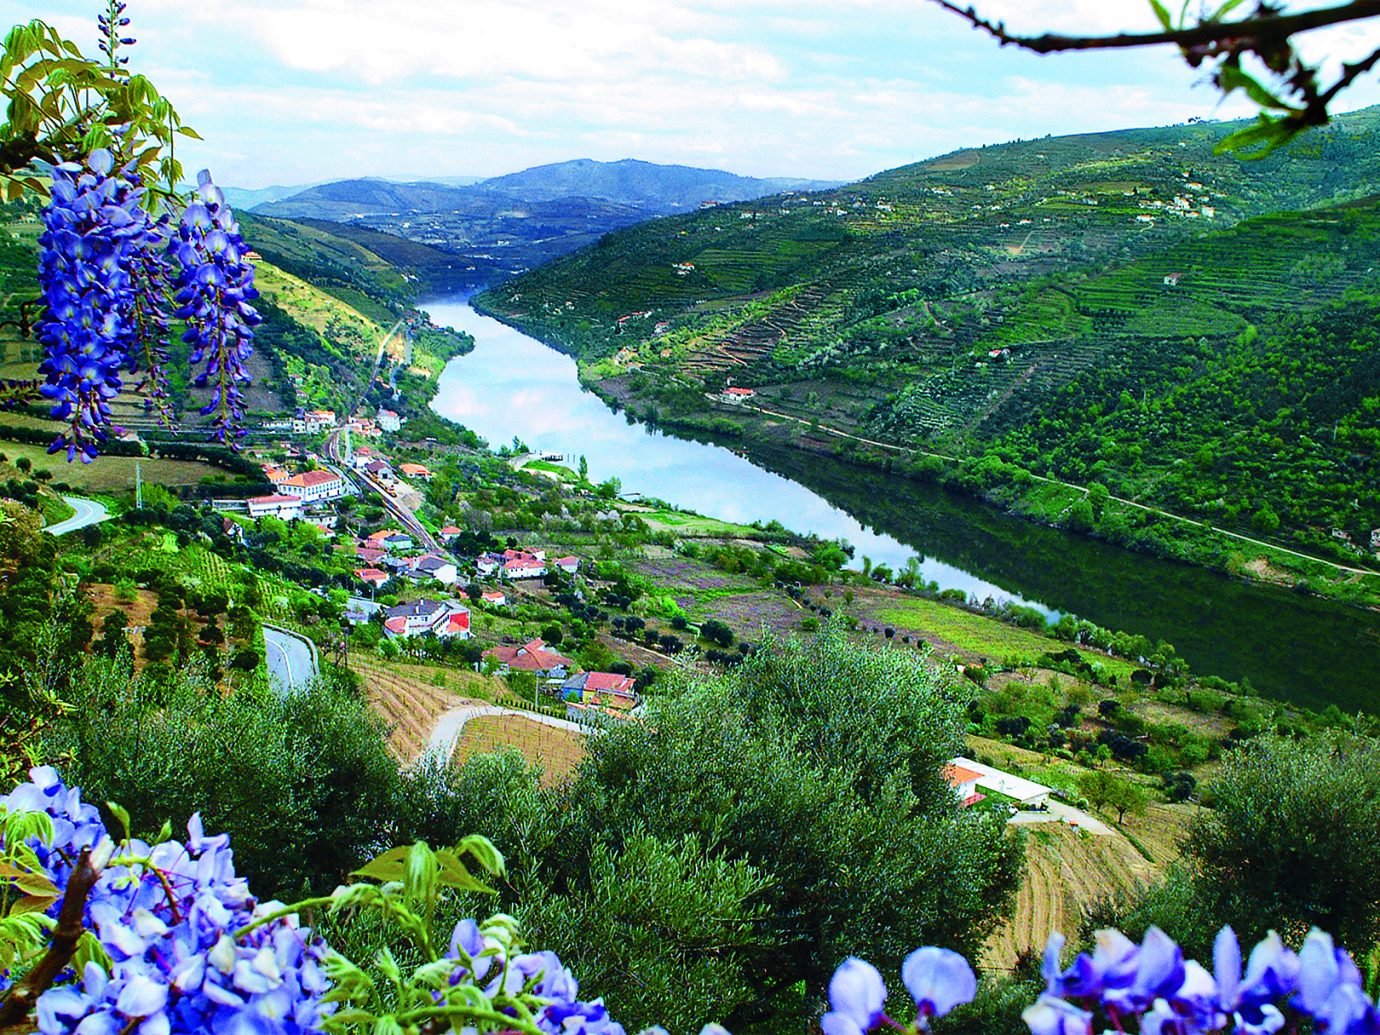 Douro River Valley view, Portugal